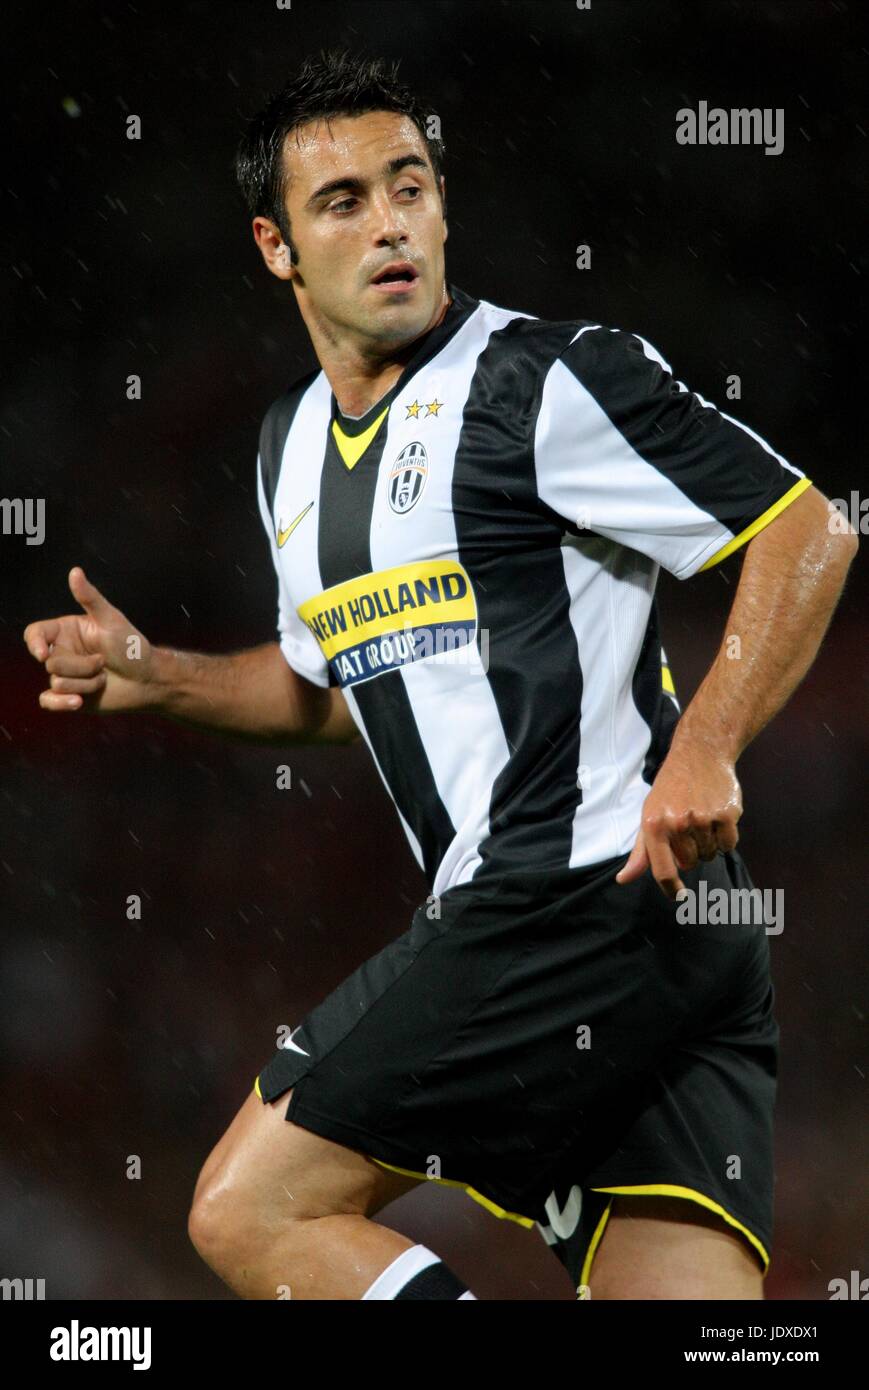 MARCO MARCHIONNI JUVENTUS FC OLD TRAFFORD Manchester Inghilterra 06 Agosto 2008 Foto Stock